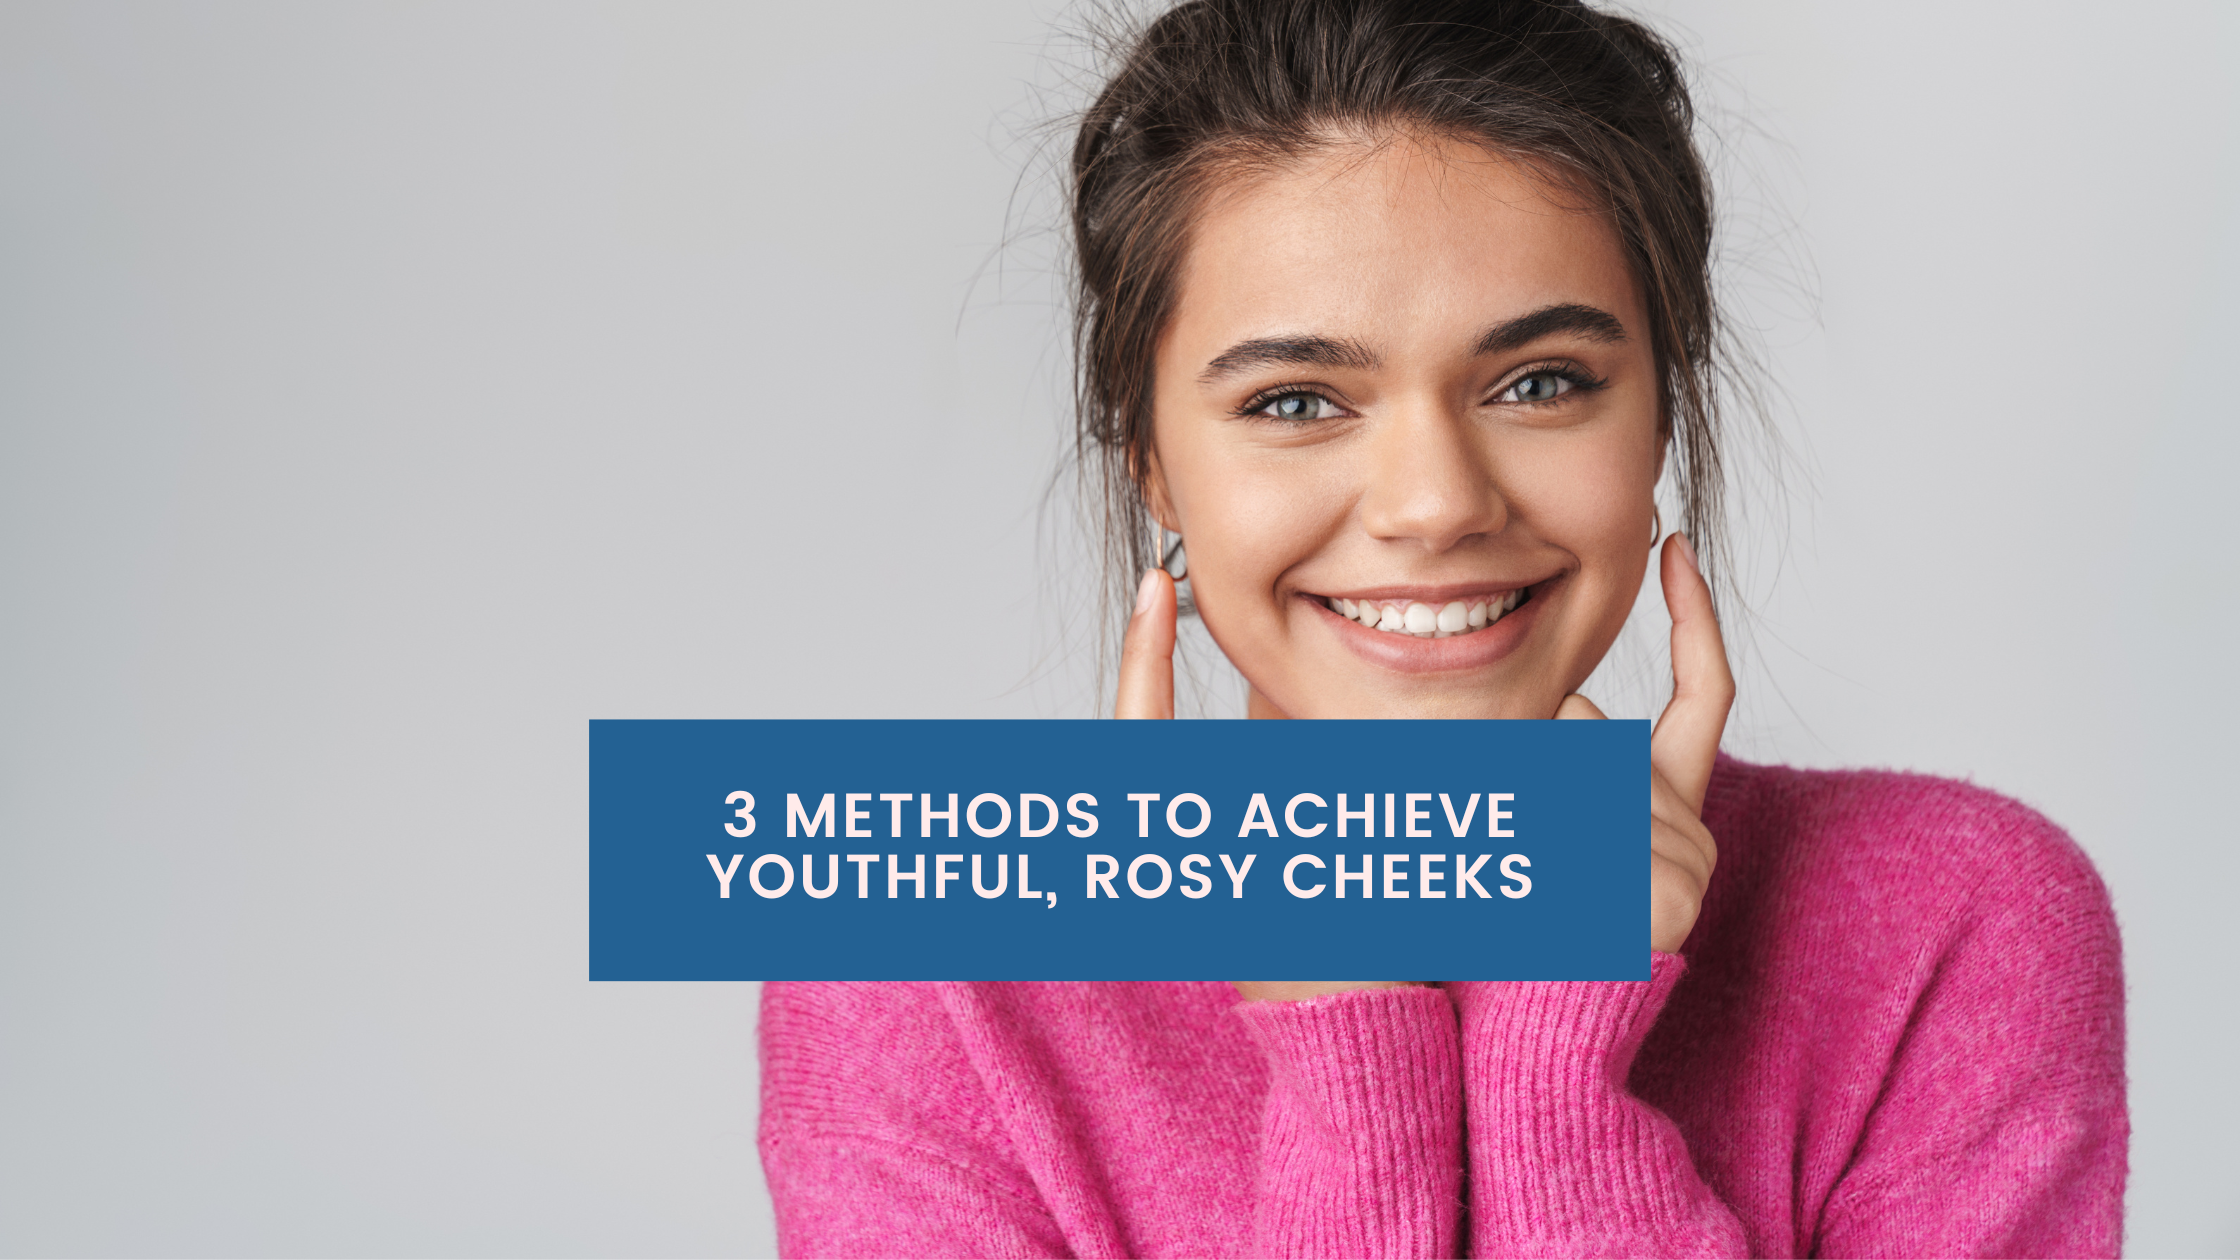 3 Methods to Achieve Youthful, Rosy Cheeks: Filler, DiamondGlow, and SkinTyte